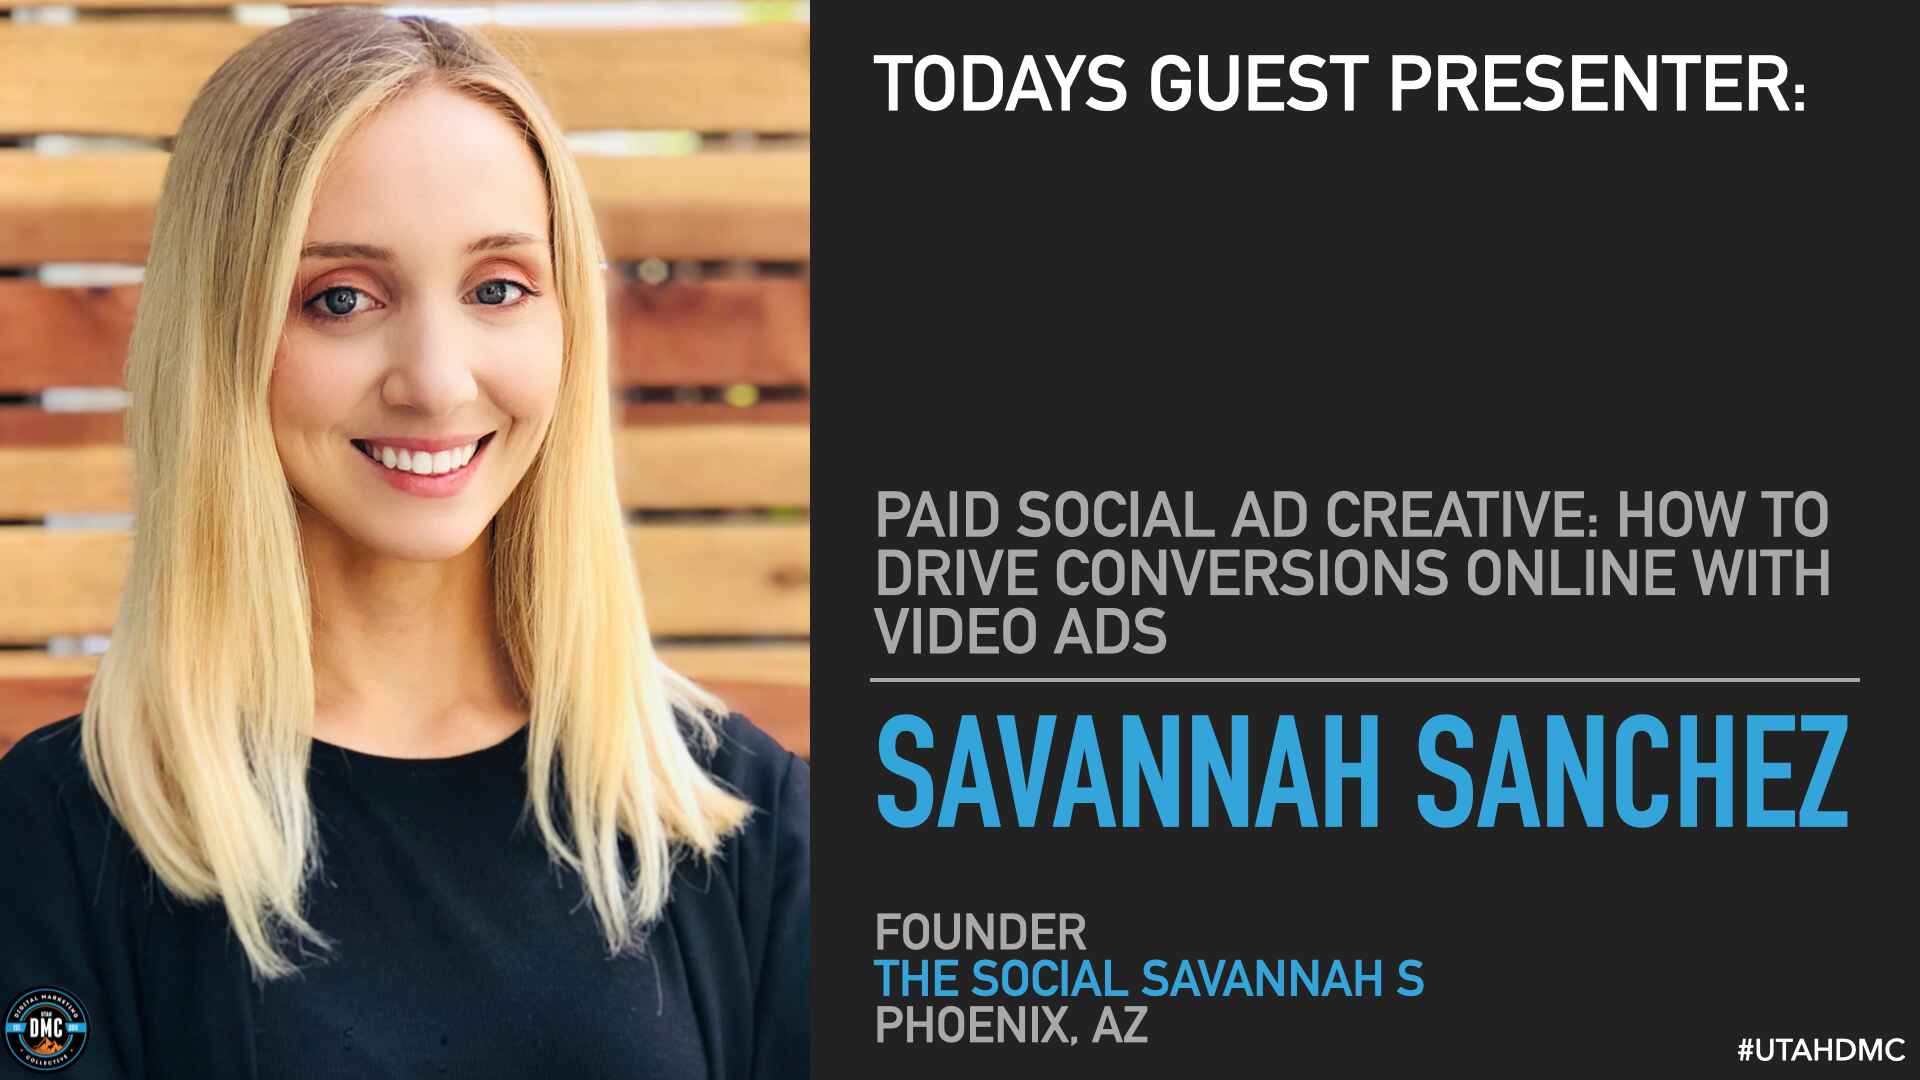 Paid Social Ad Creative: How to Drive Conversions Online with Video Ads